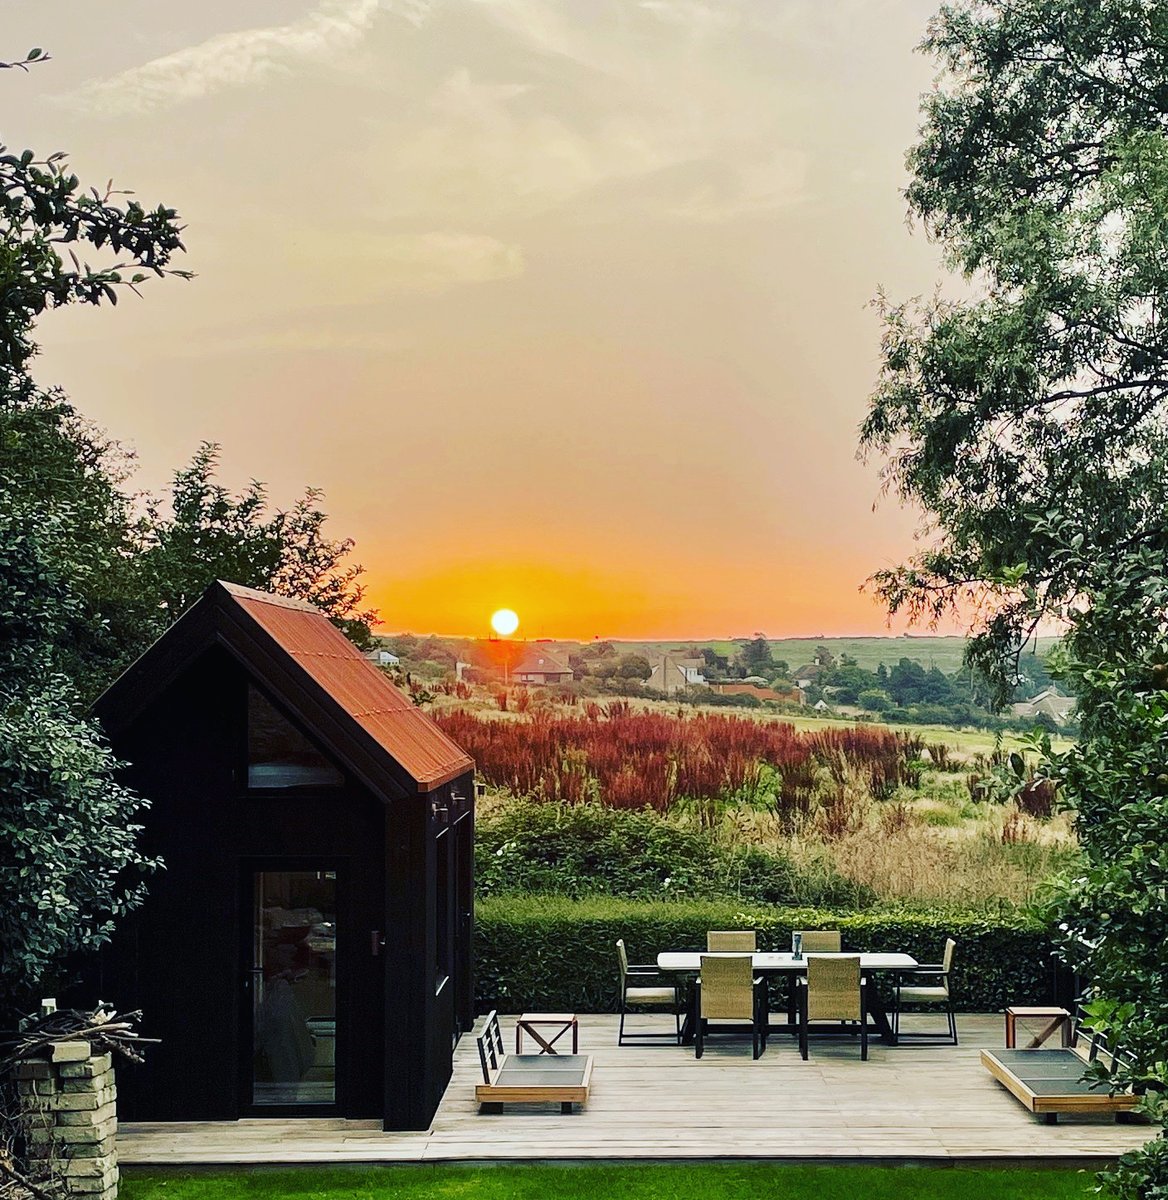 What a beautiful sunset to compliment the warm glow of this stunning cabin with our COR-TEN Roof 🌅 #CORTENRoof #cortensteel #corten #madeinbritain #madeinscotland #youdesignitwemakeit